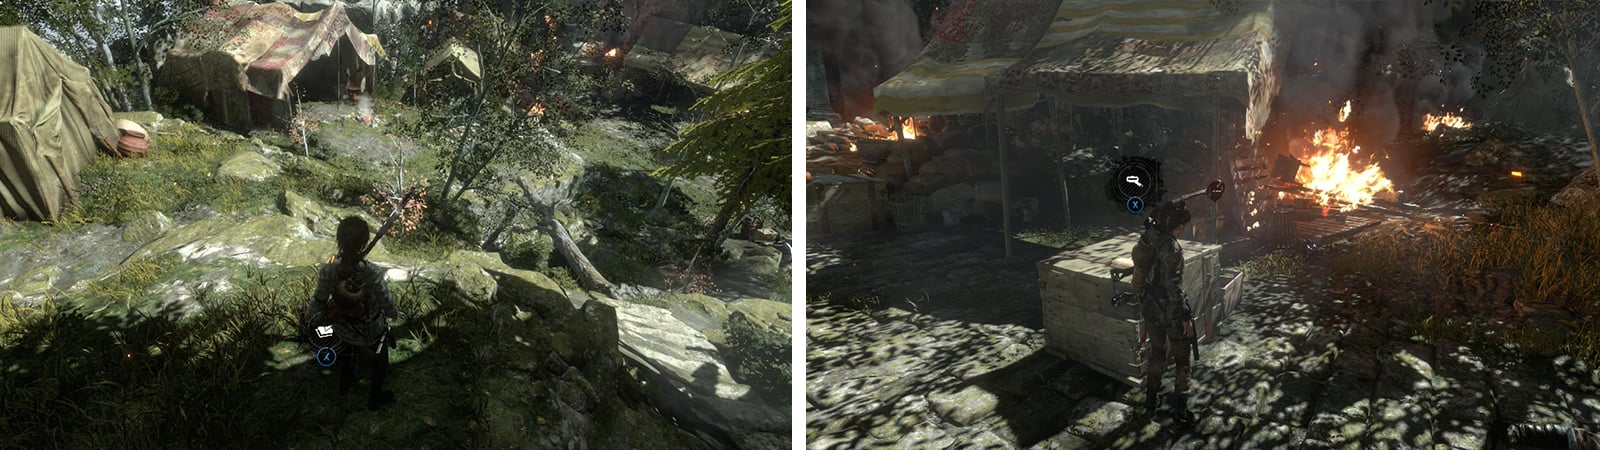 Before enetering town grab Survival Cache 01 (left). Opposite the Base Camp youll find Document 02 (right).